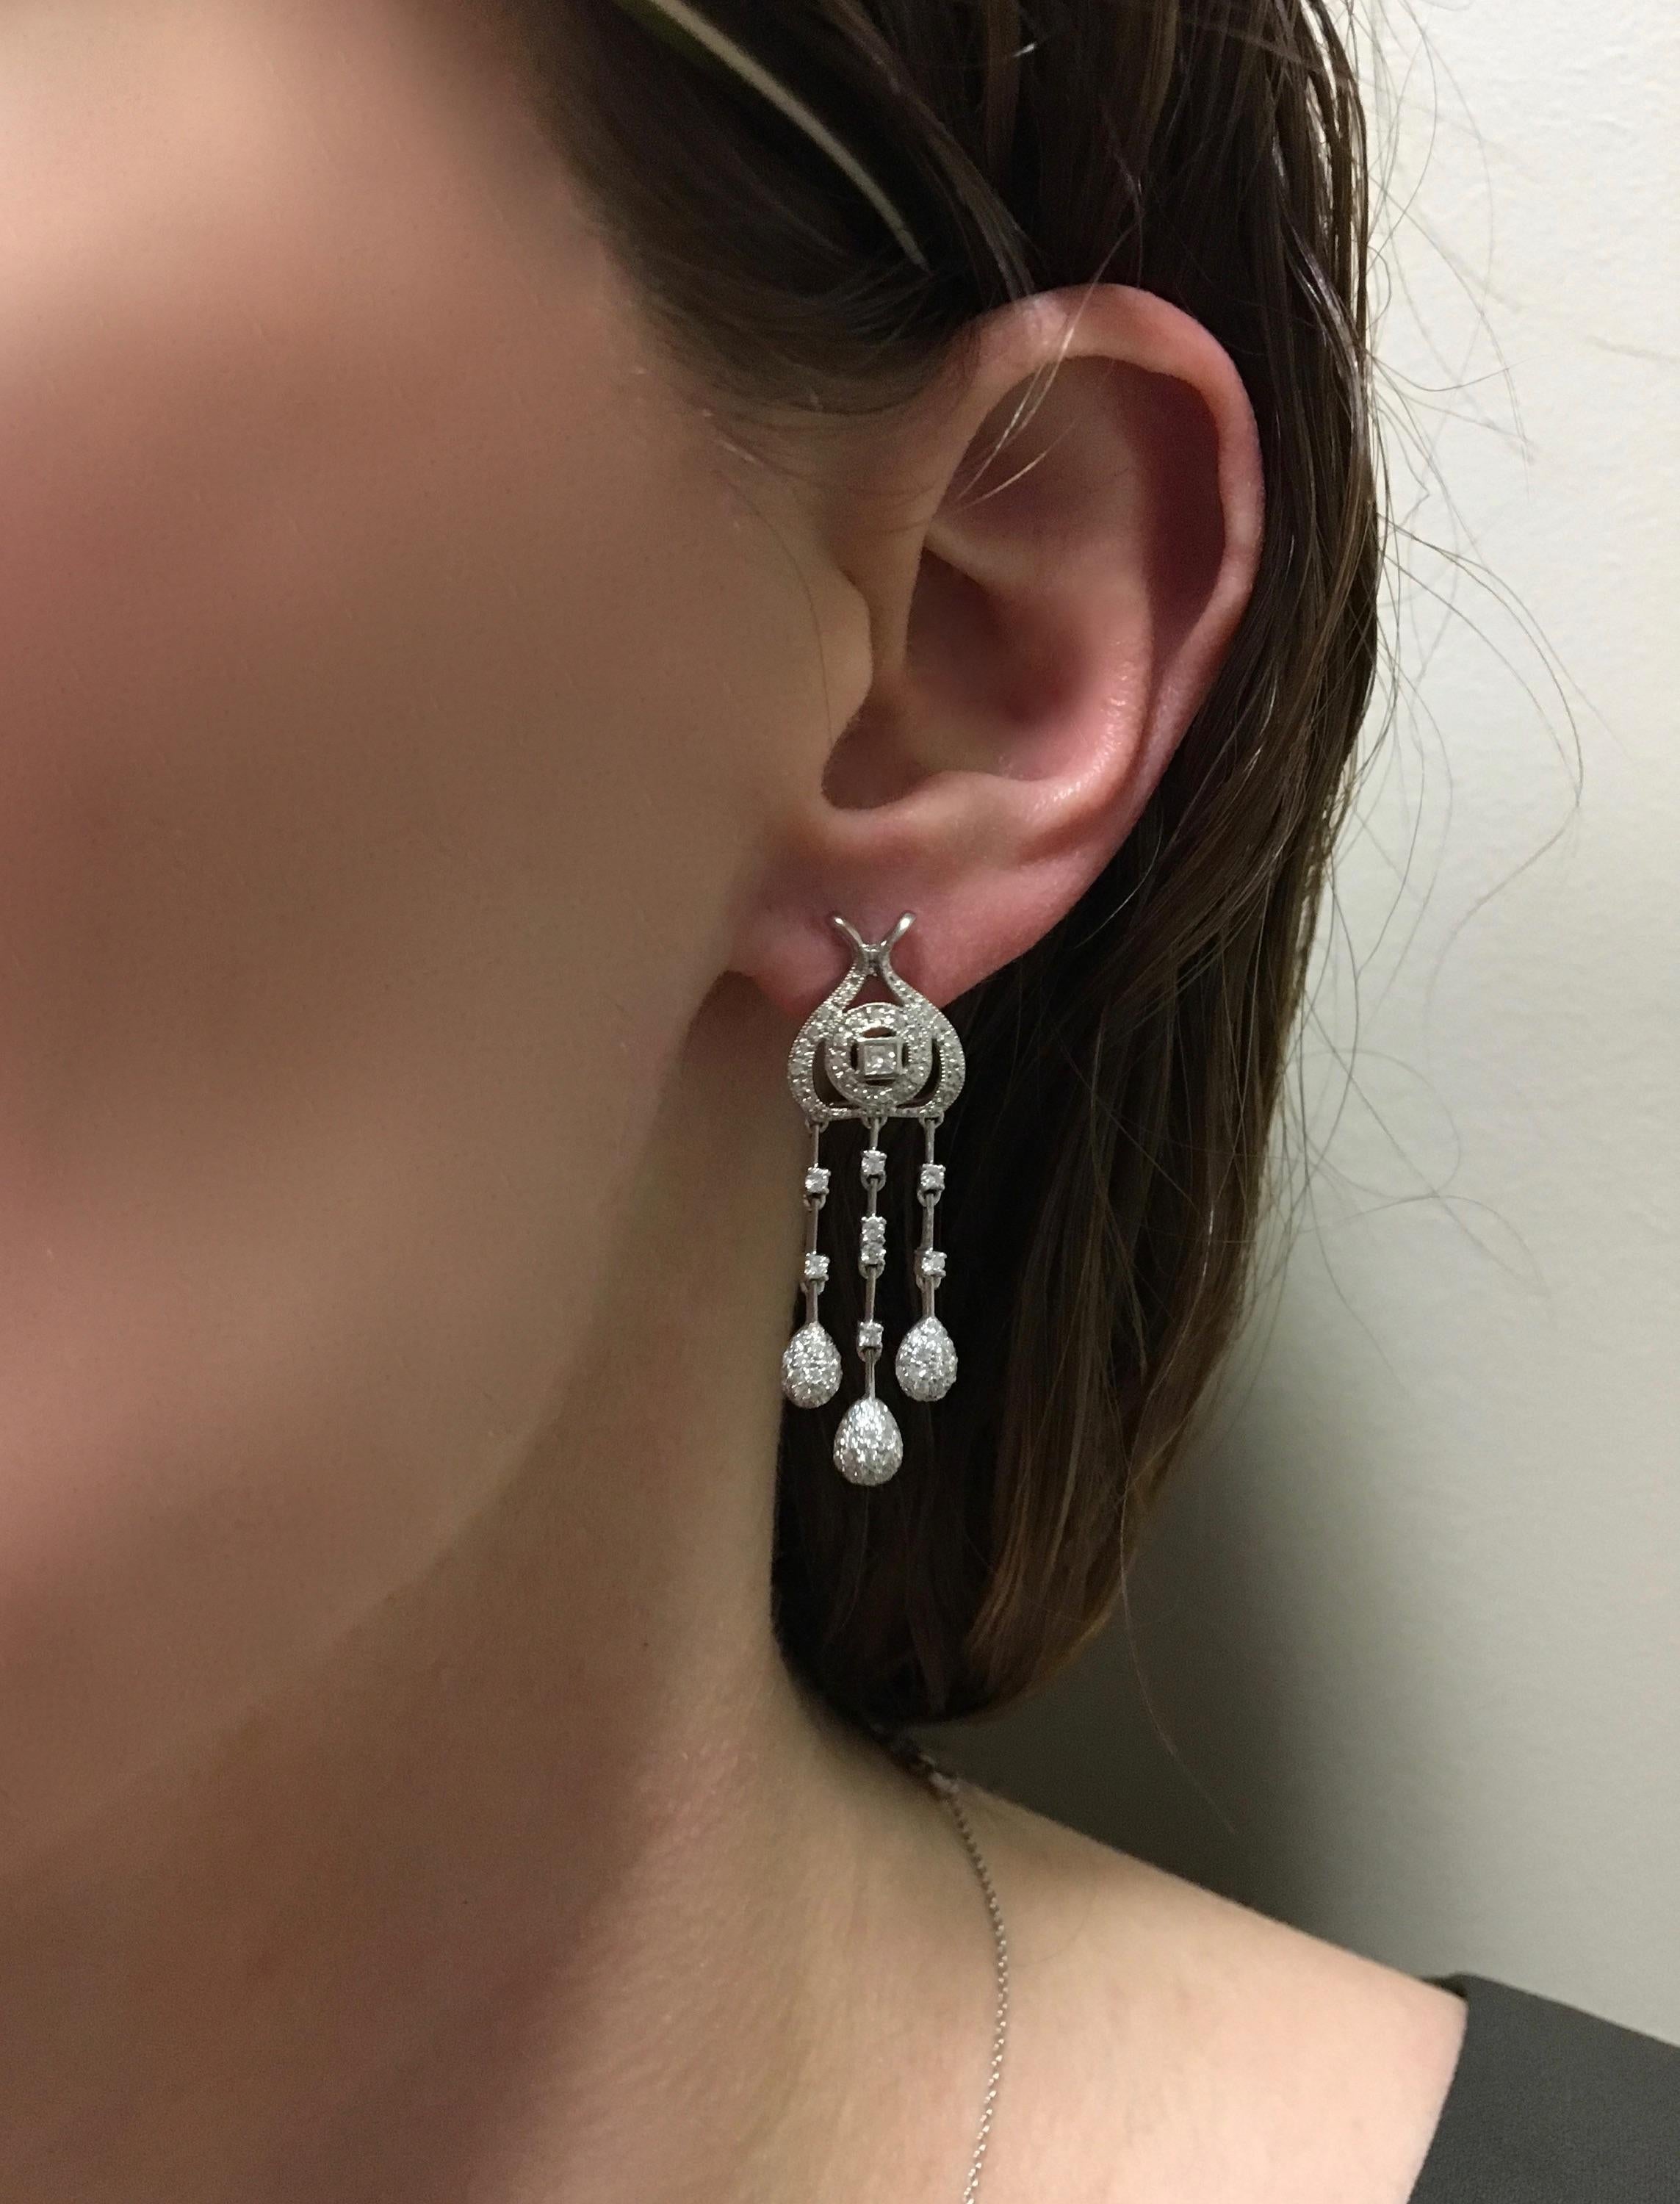 These elegant 18K white gold chandelier style dangle earrings feature approximately 1.07CTW of Diamonds.

Diamond Carat Weight: Approximately 1.07CTW
Diamond Cut:  Round Brilliant Cut Diamonds and Two Princess Cut Diamonds
Color: Average